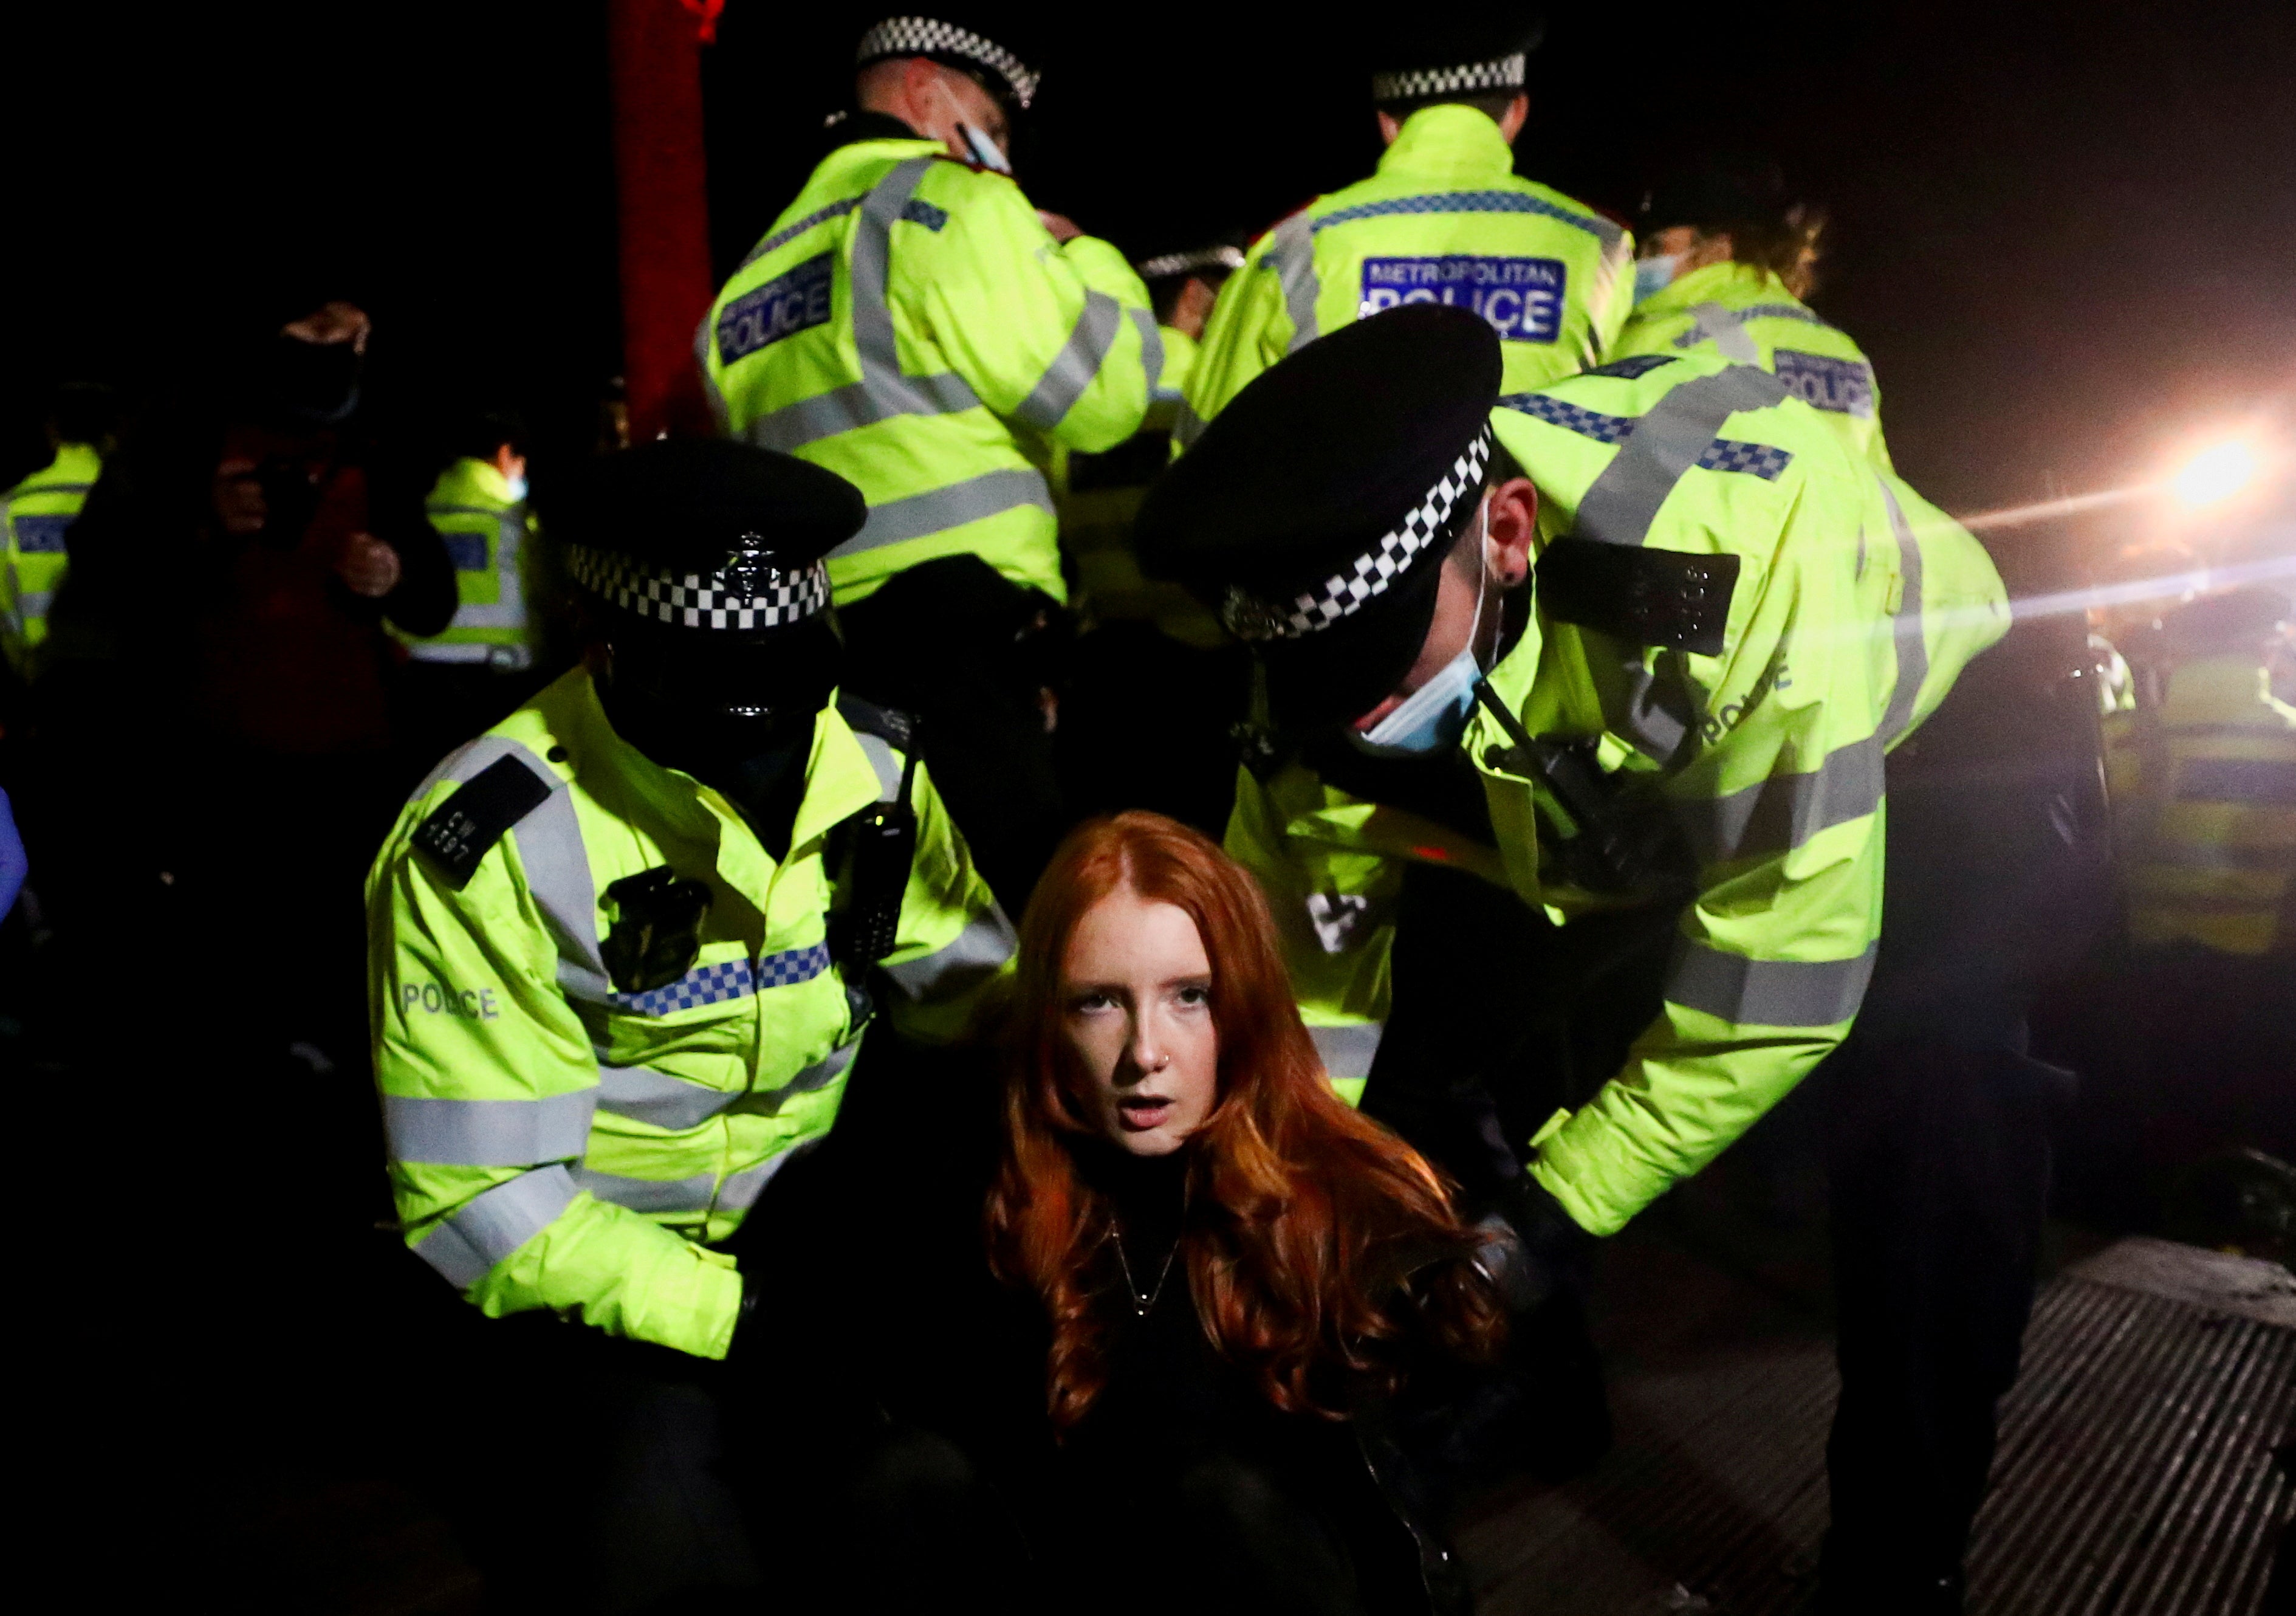 Police detain a woman as people gather at a memorial site in Clapham Common following the murder of Sarah Everard in London